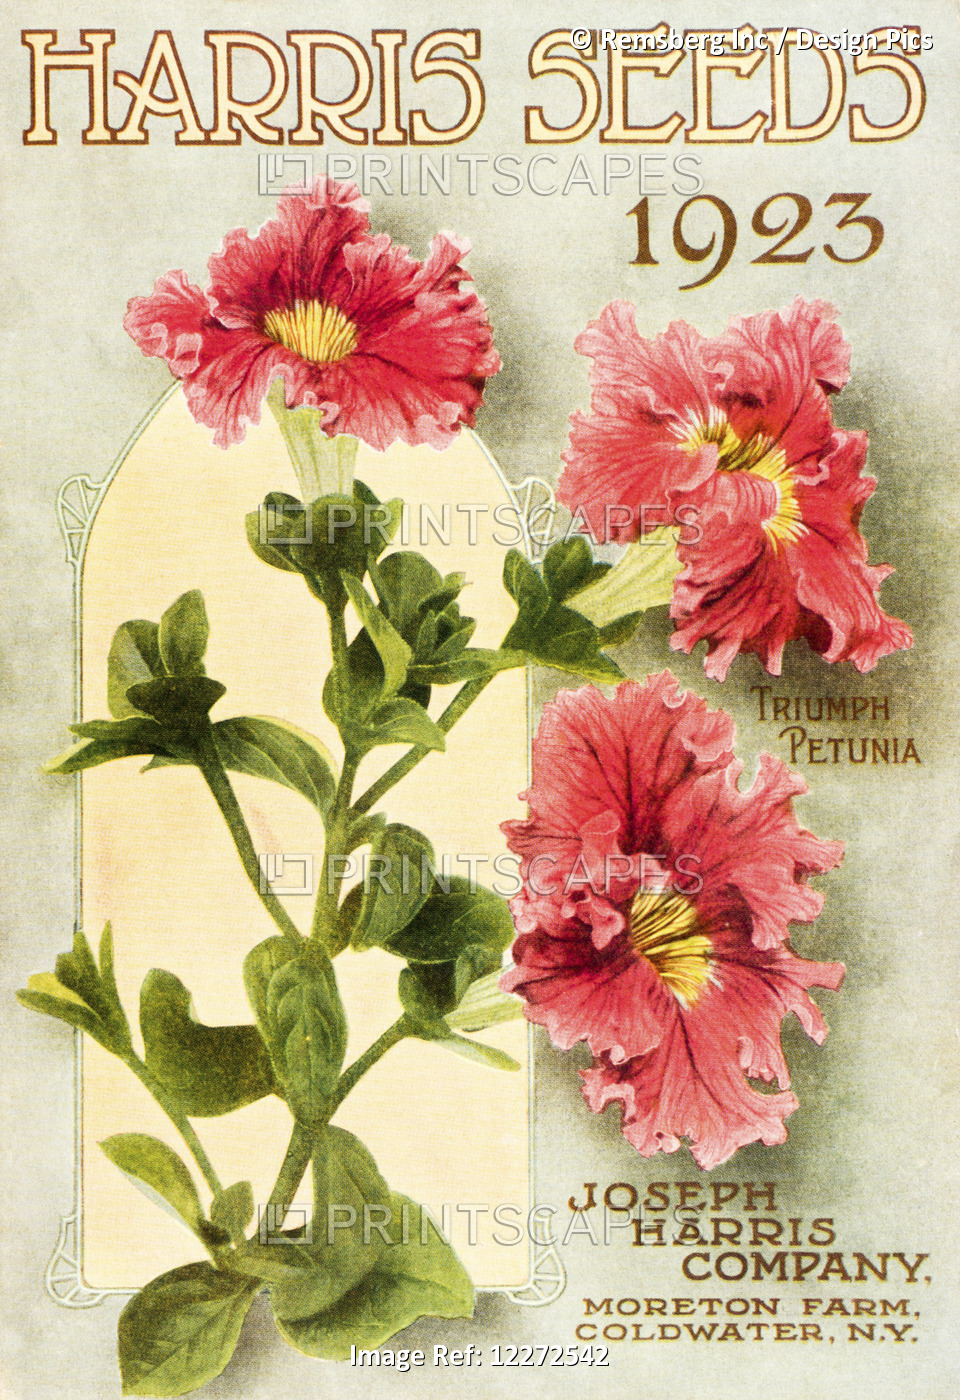 Historic Harris Seeds Catalog With Illustration Of Triumph Petunia Flower From ...